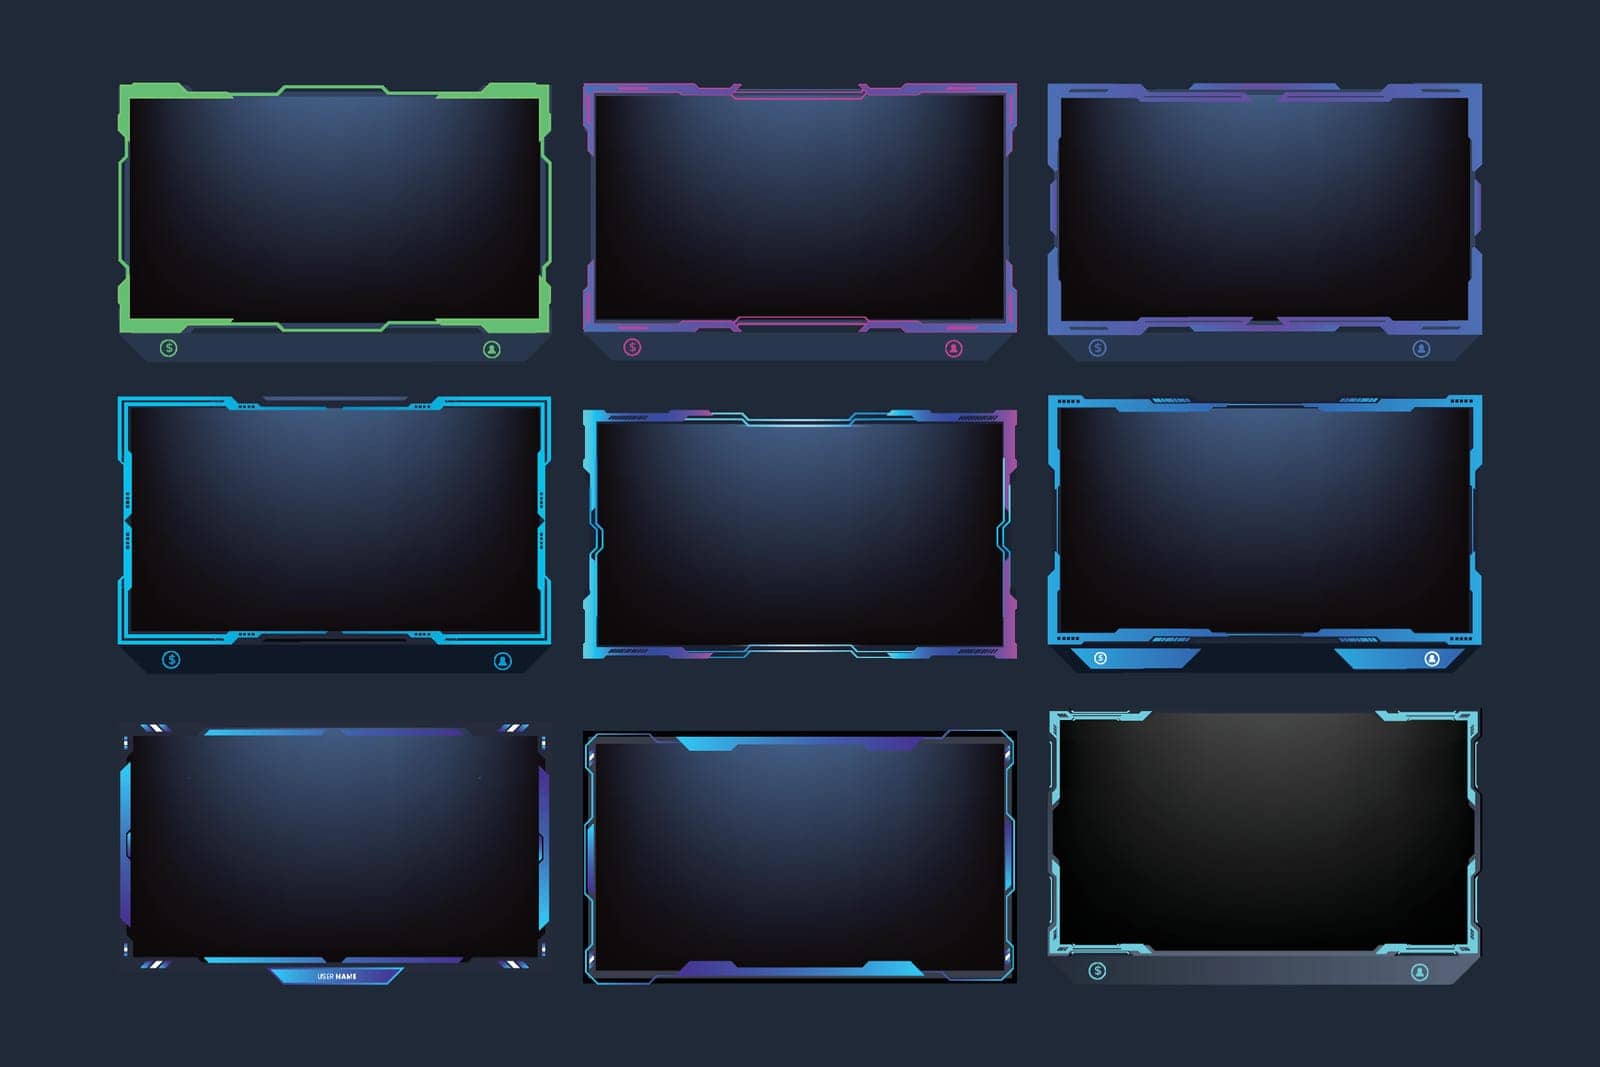 Simple streaming overlay and screen interface set design with blue, purple, and green colors. Live streaming overlay bundle vector. Modern gaming frame design collection on a dark background.